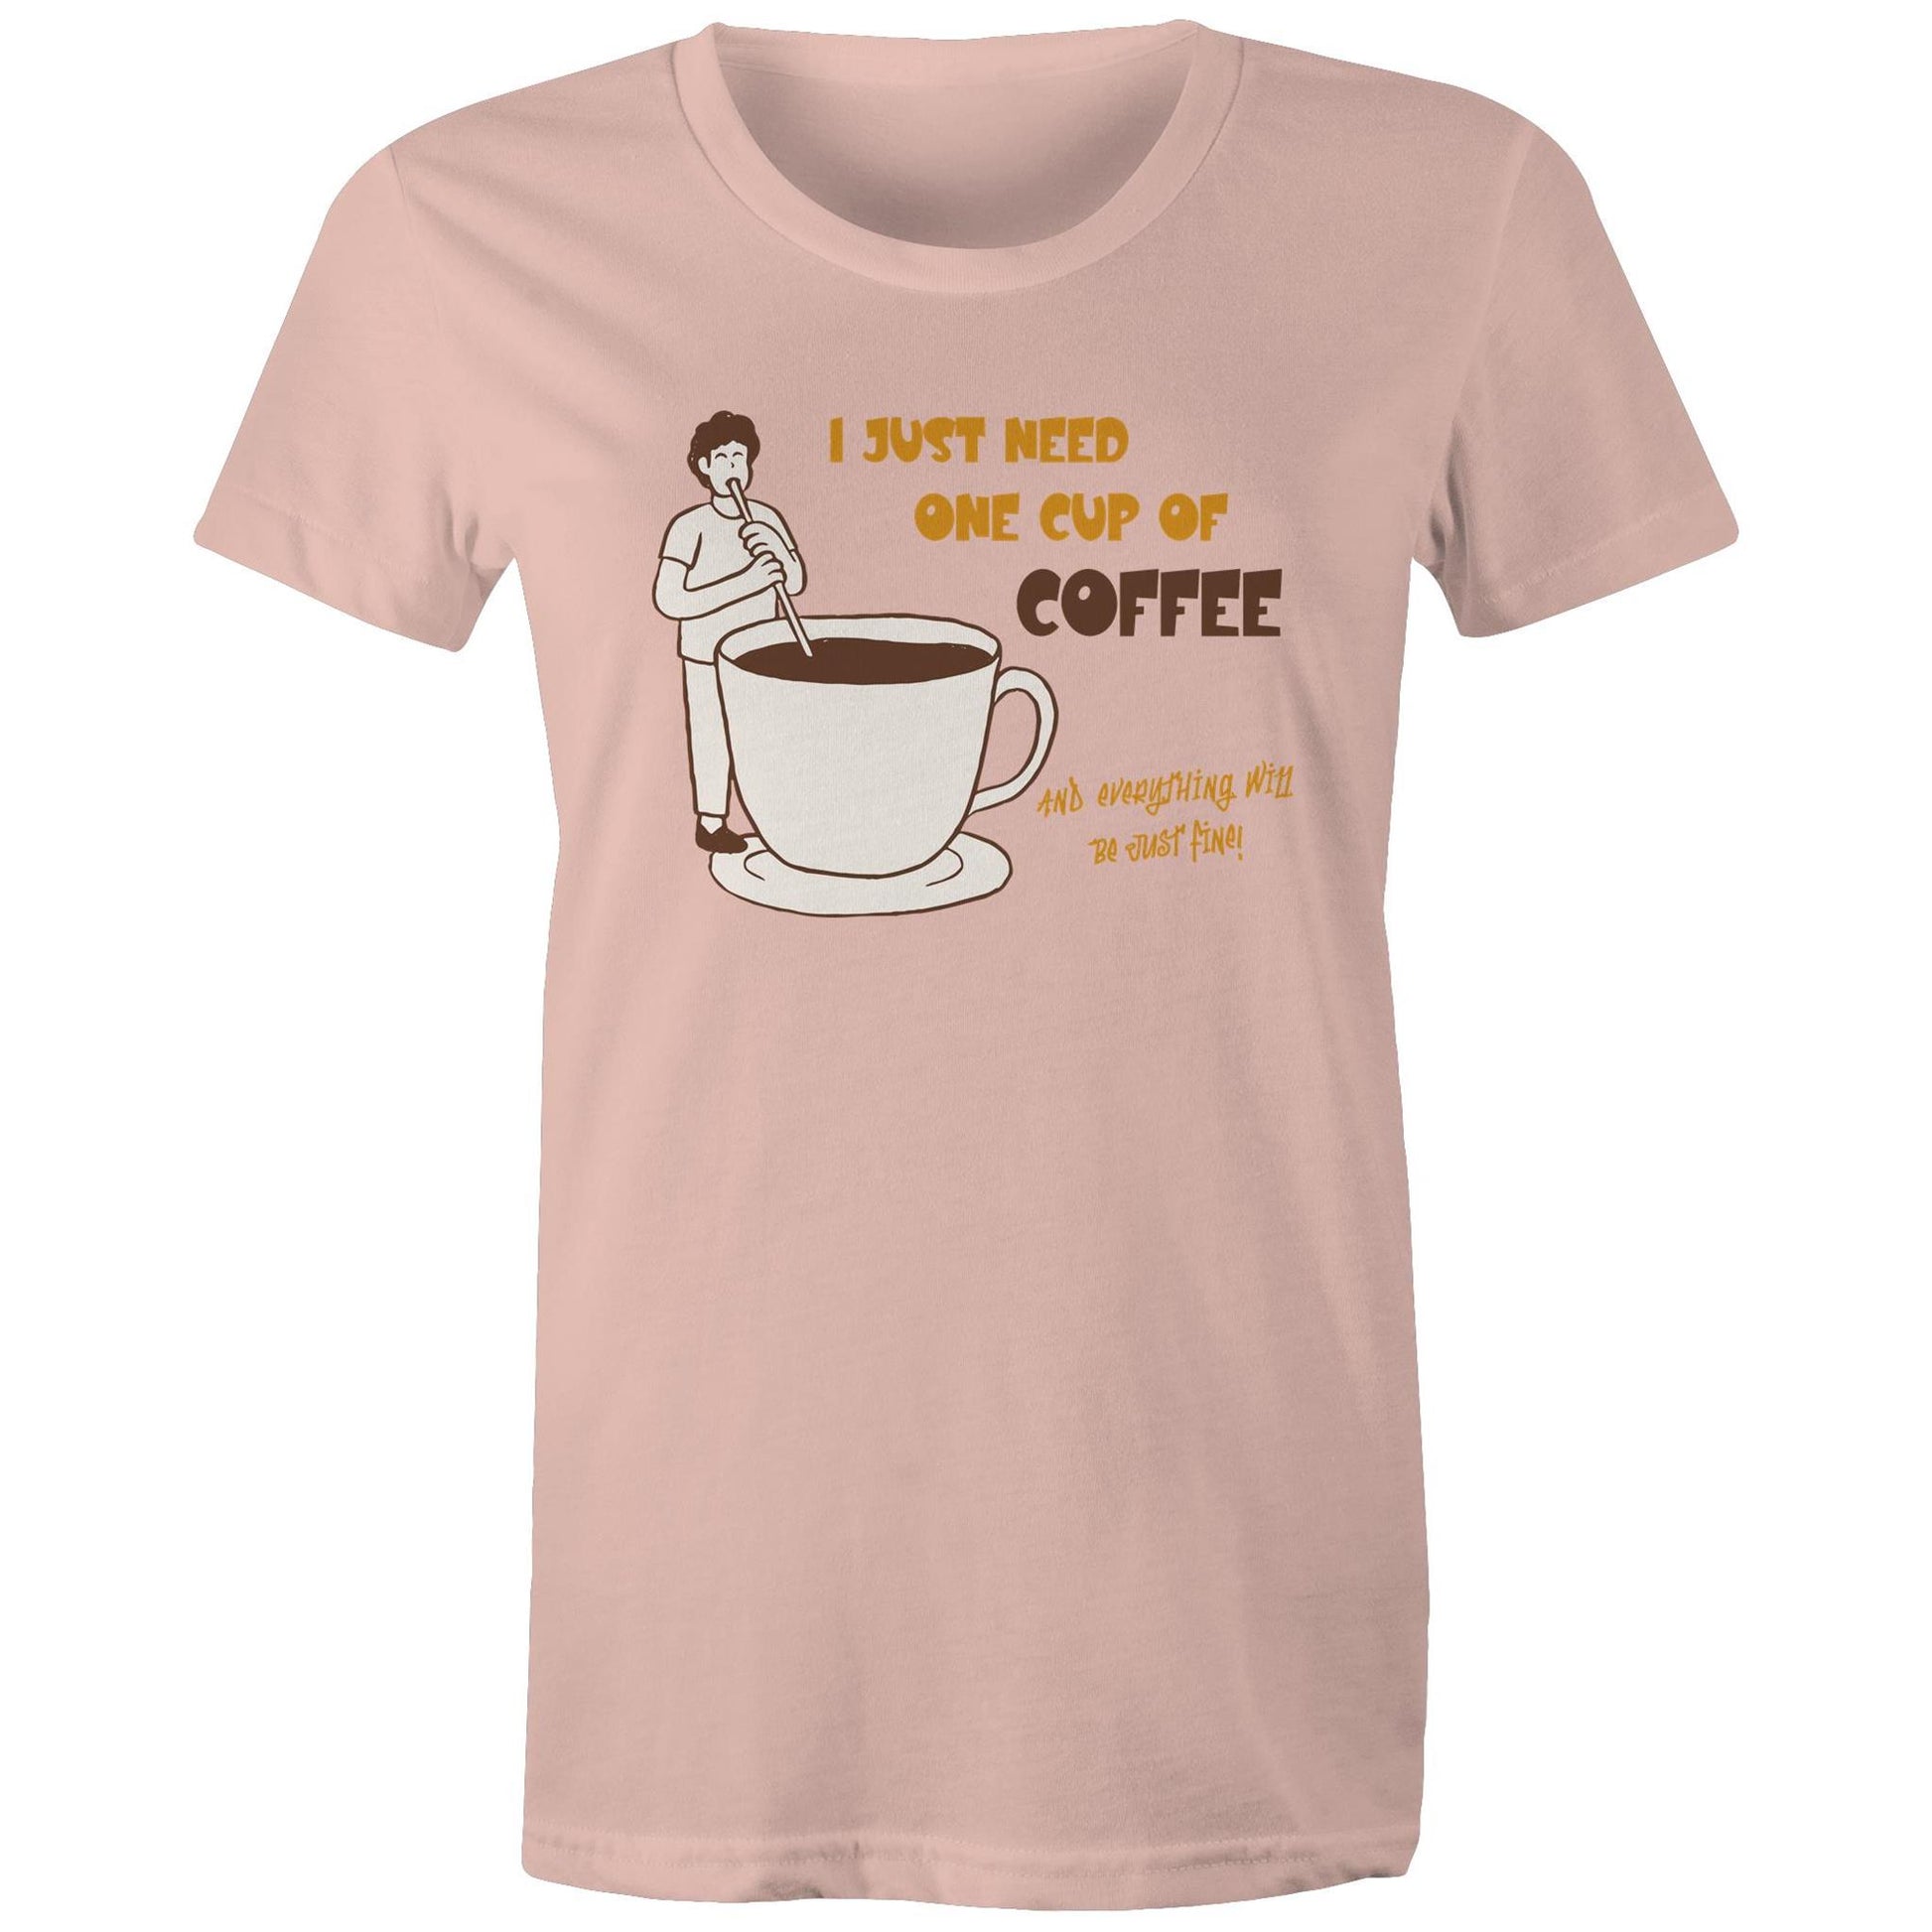 I Just Need One Cup Of Coffee And Everything Will Be Just Fine - Womens T-shirt Pale Pink Womens T-shirt Coffee